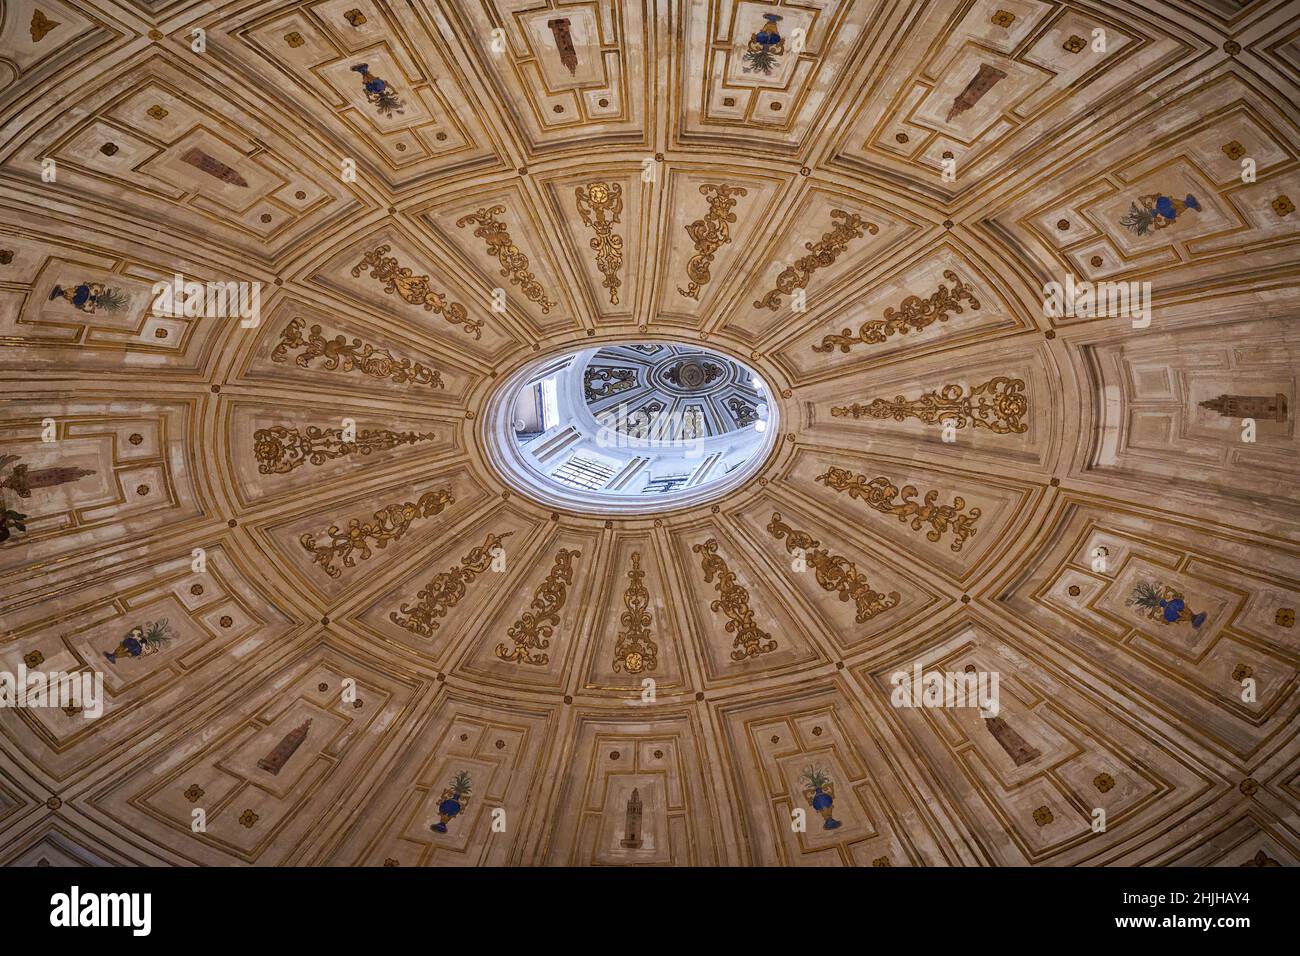 Ceiling with gold petters and artworks of the dome in the Sala Capitular Stock Photo